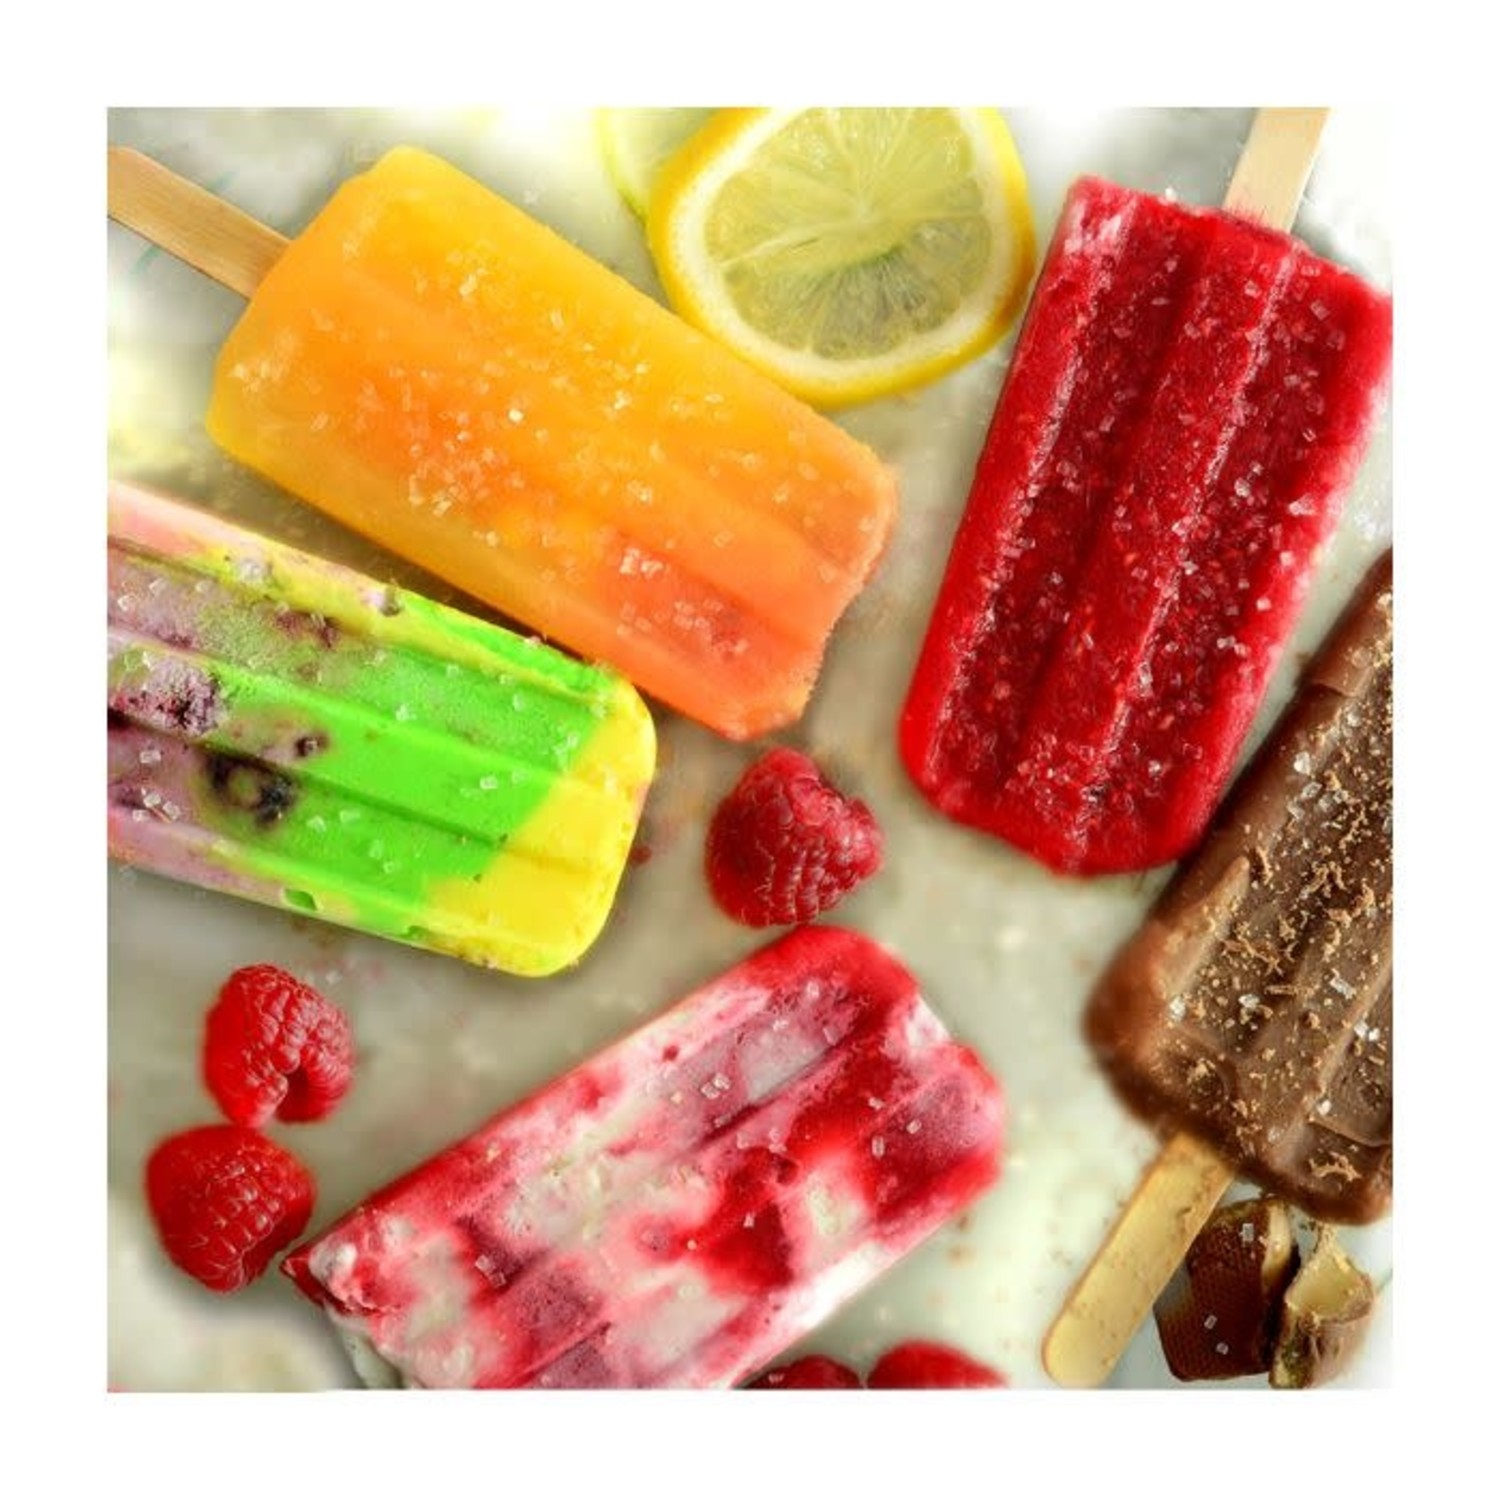 NEW Tovolo Set of 4 Twin Pop Molds - Create Healthy Frozen Treats Popsicles